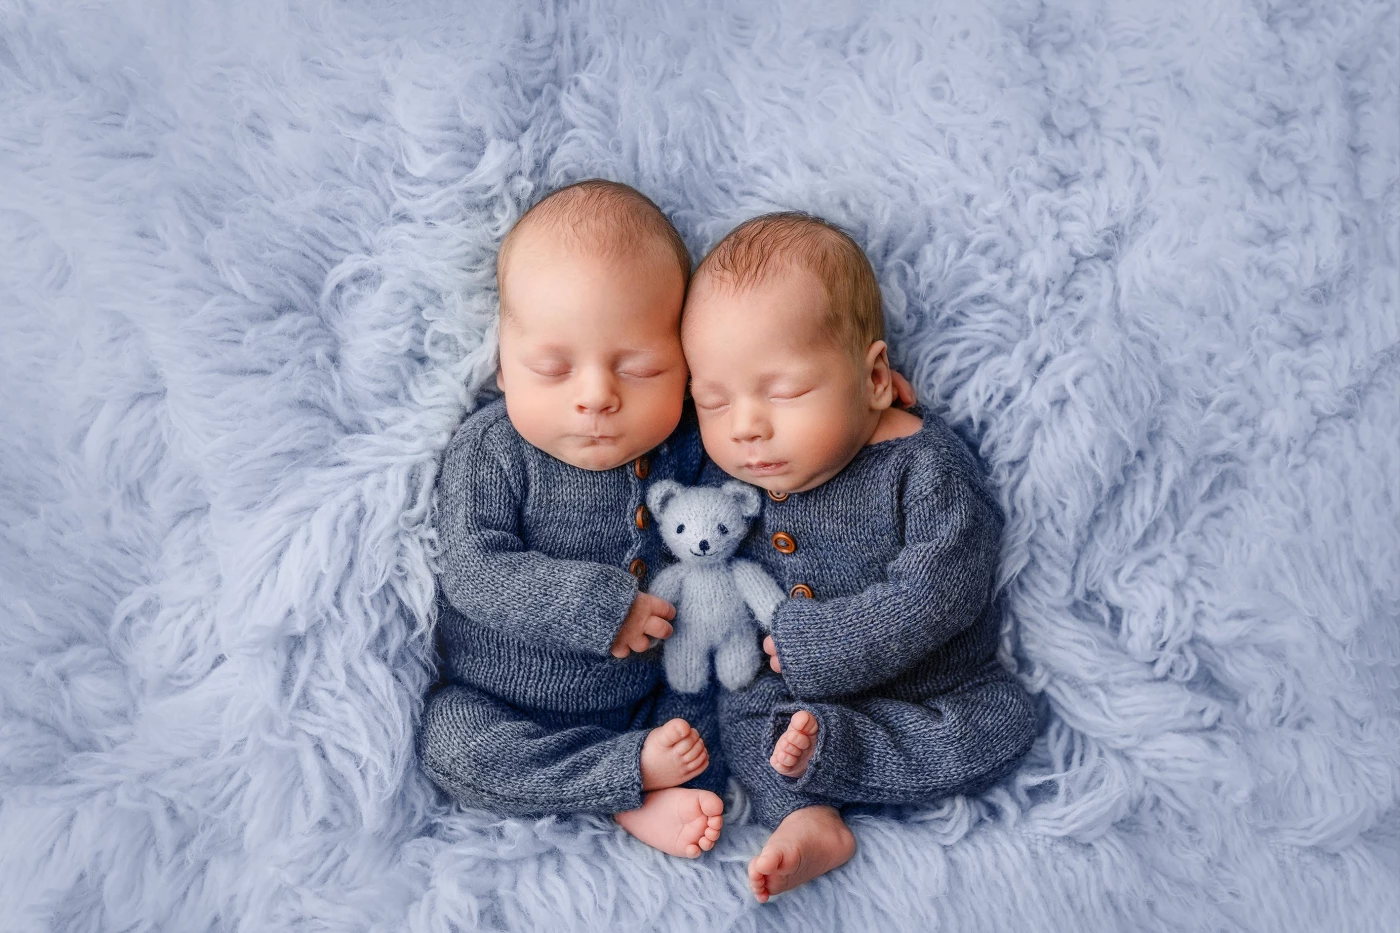 I had the privilege of photographing a beautiful twin duo recently. Originally expected to arrive in February, these two boys surprised everyone by coming a few weeks early, adding to the excitement.<br />
<br />
During their newborn session, they were absolutely amazing. Their adorable presence filled the room, and I captured a stunning series of photos, immortalizing their tender and pure moments.<br />
<br />
It was an honor to capture these precious moments. Each photograph from their newborn session is a treasured reminder of the joy this twin duo brings. I hope these images will always remind their parents of the invaluable connection their boys share.